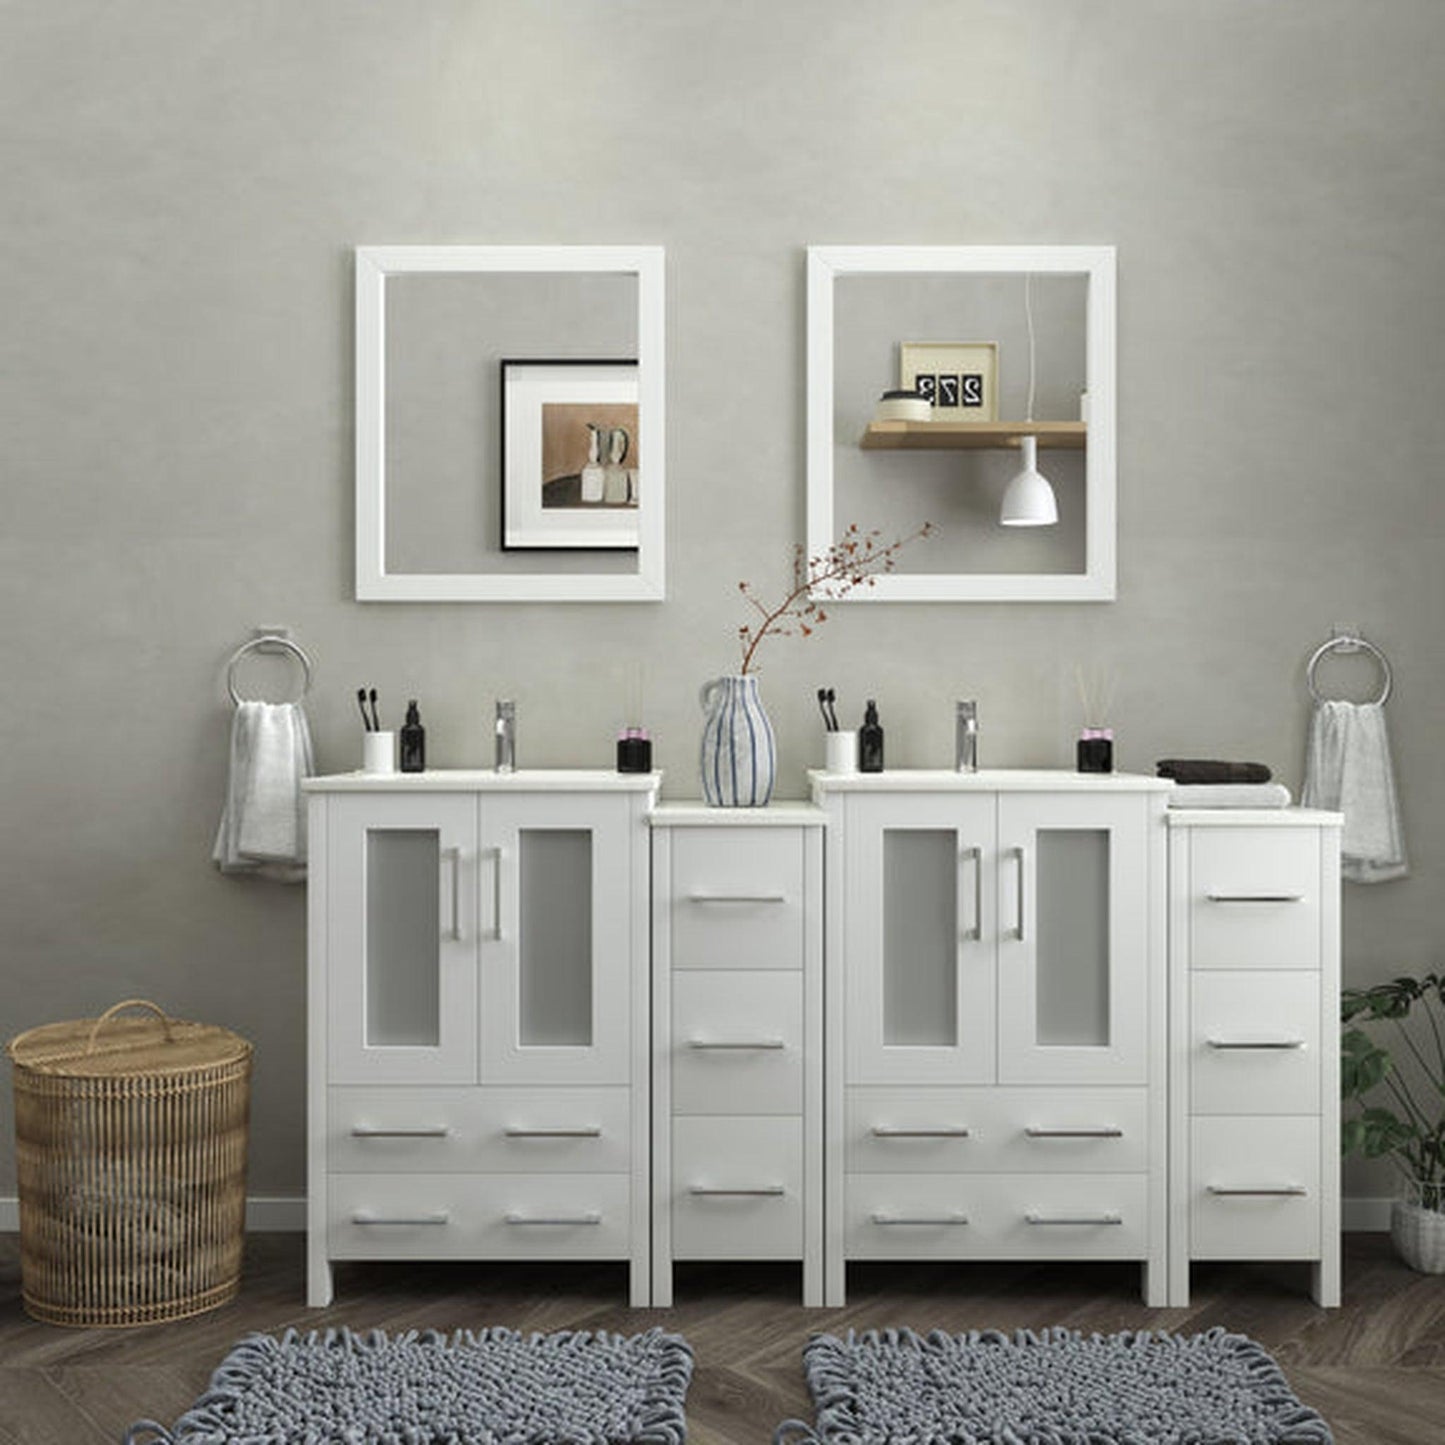 Vanity Art Brescia 72" Double White Freestanding Vanity Set With Integrated Ceramic Sink, 2 Side Cabinets and 2 Mirrors